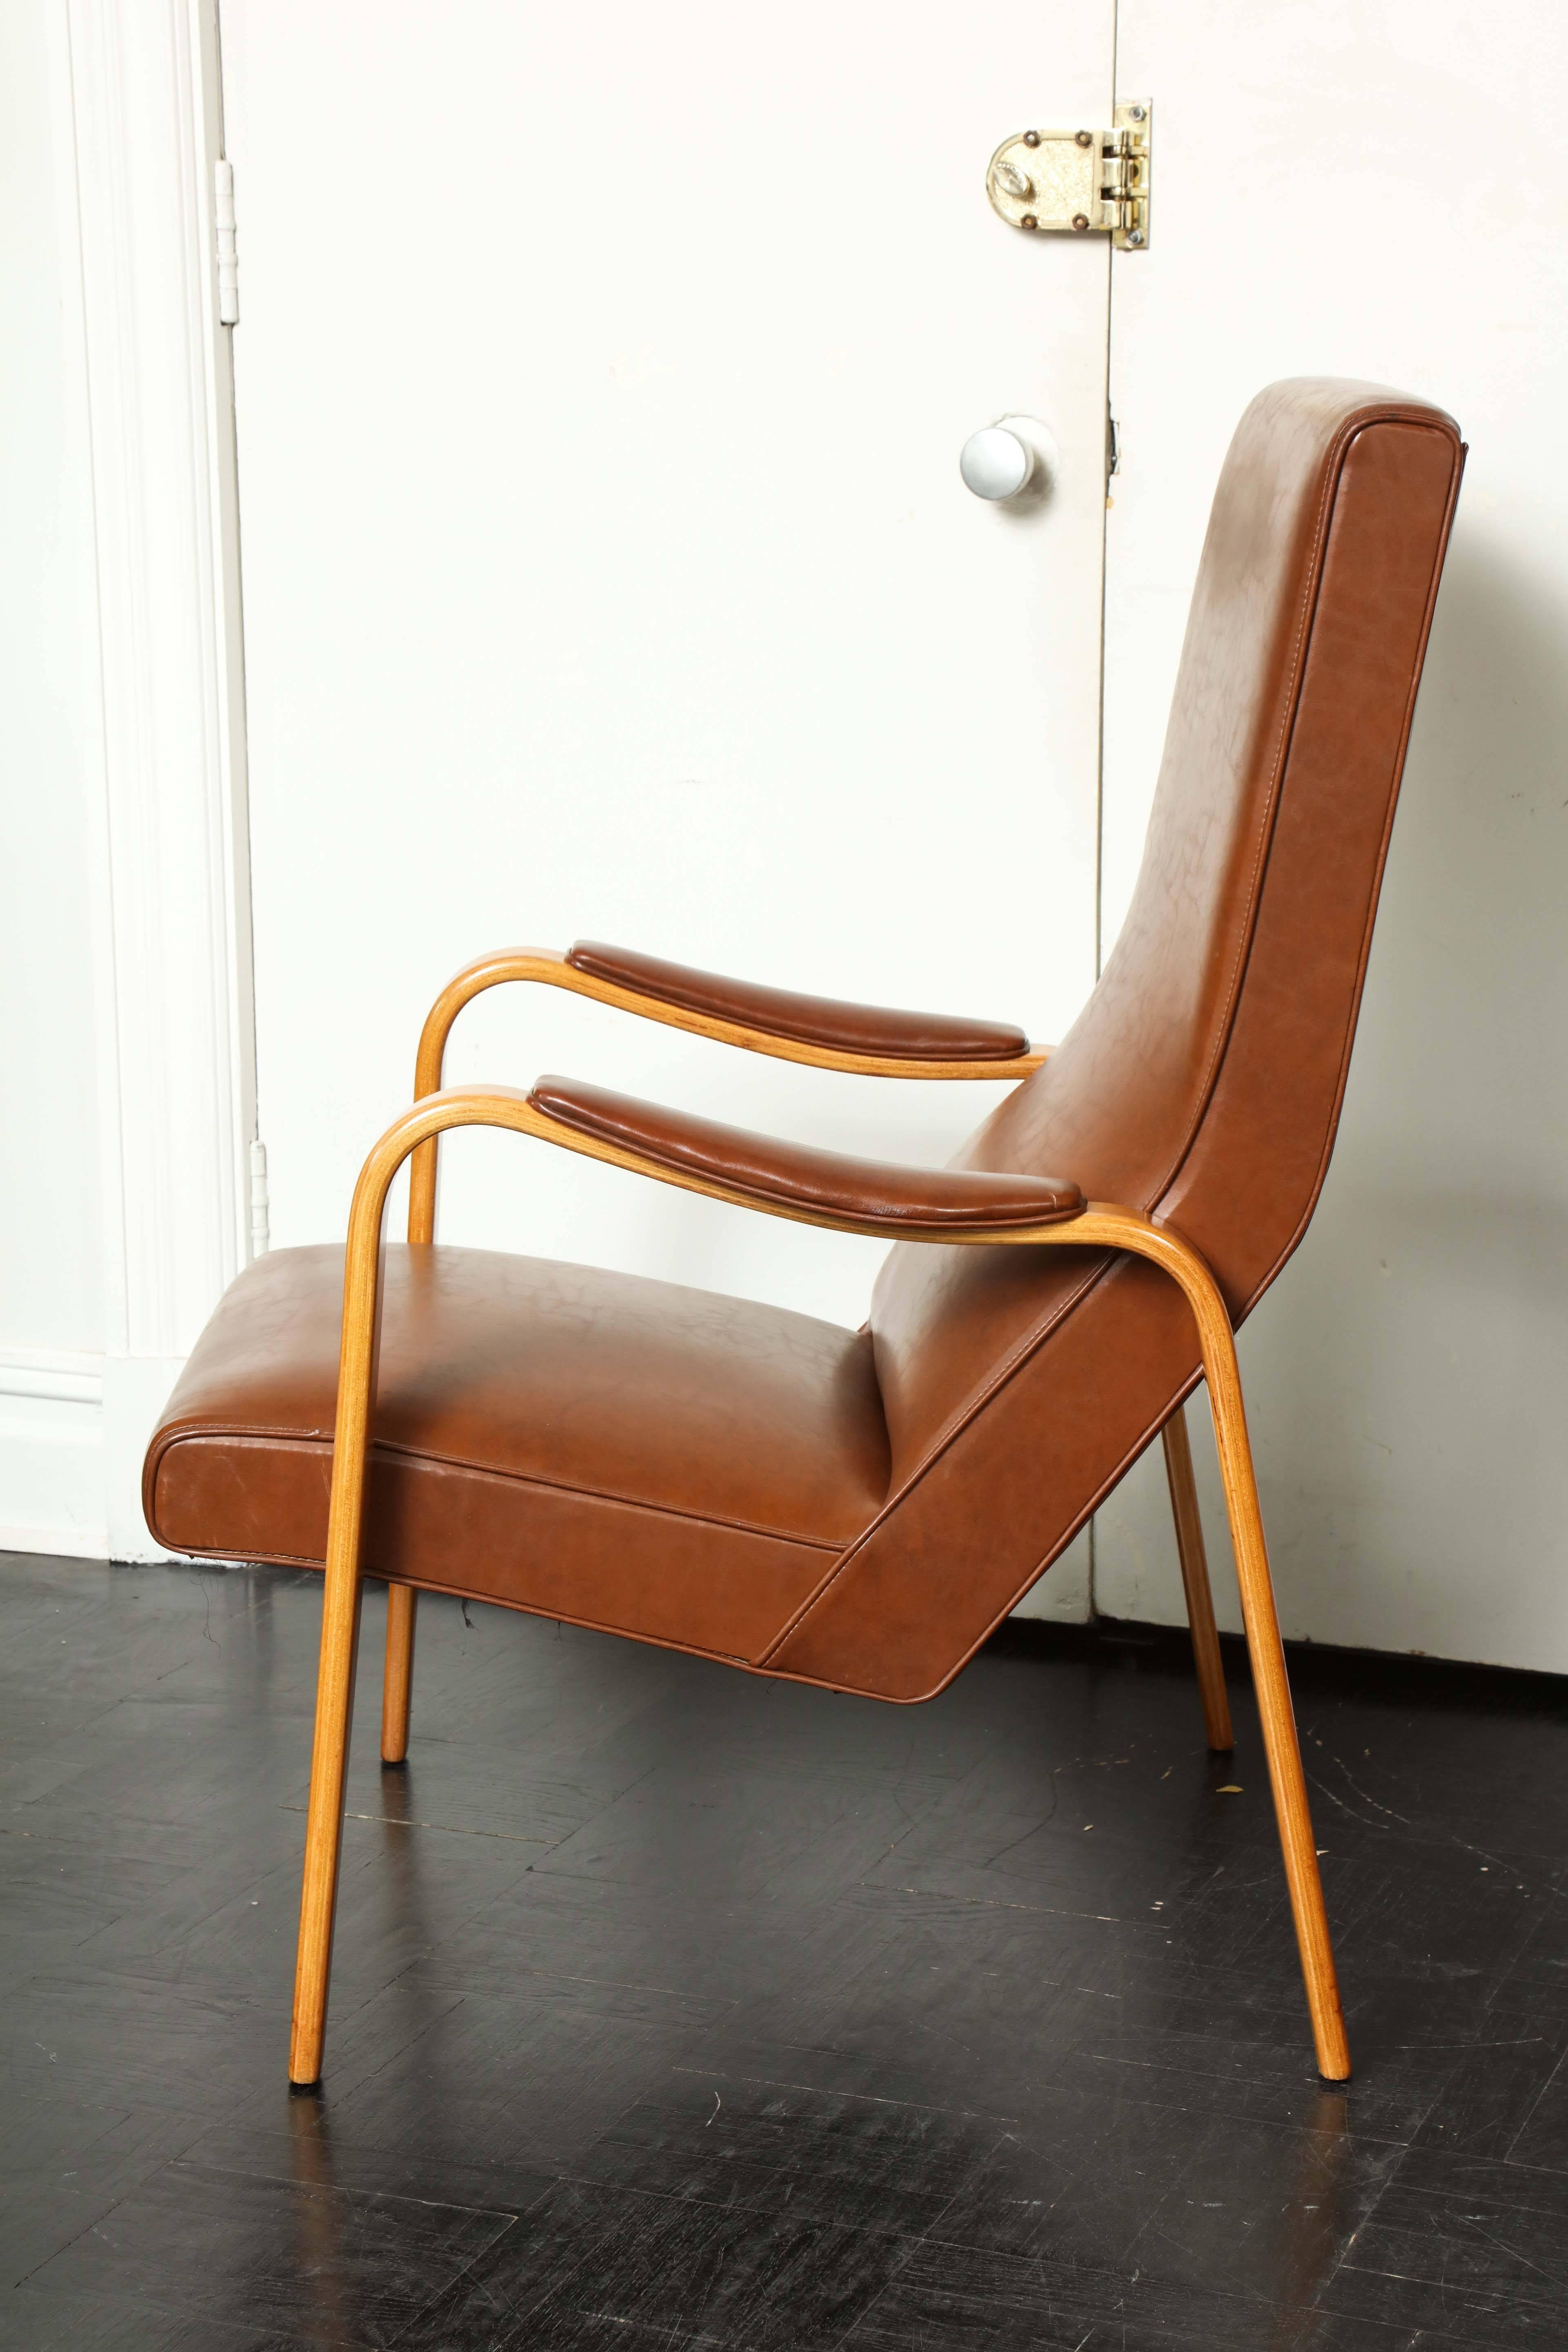 French Mid-20th Century Walnut and Leather Open Armchair For Sale